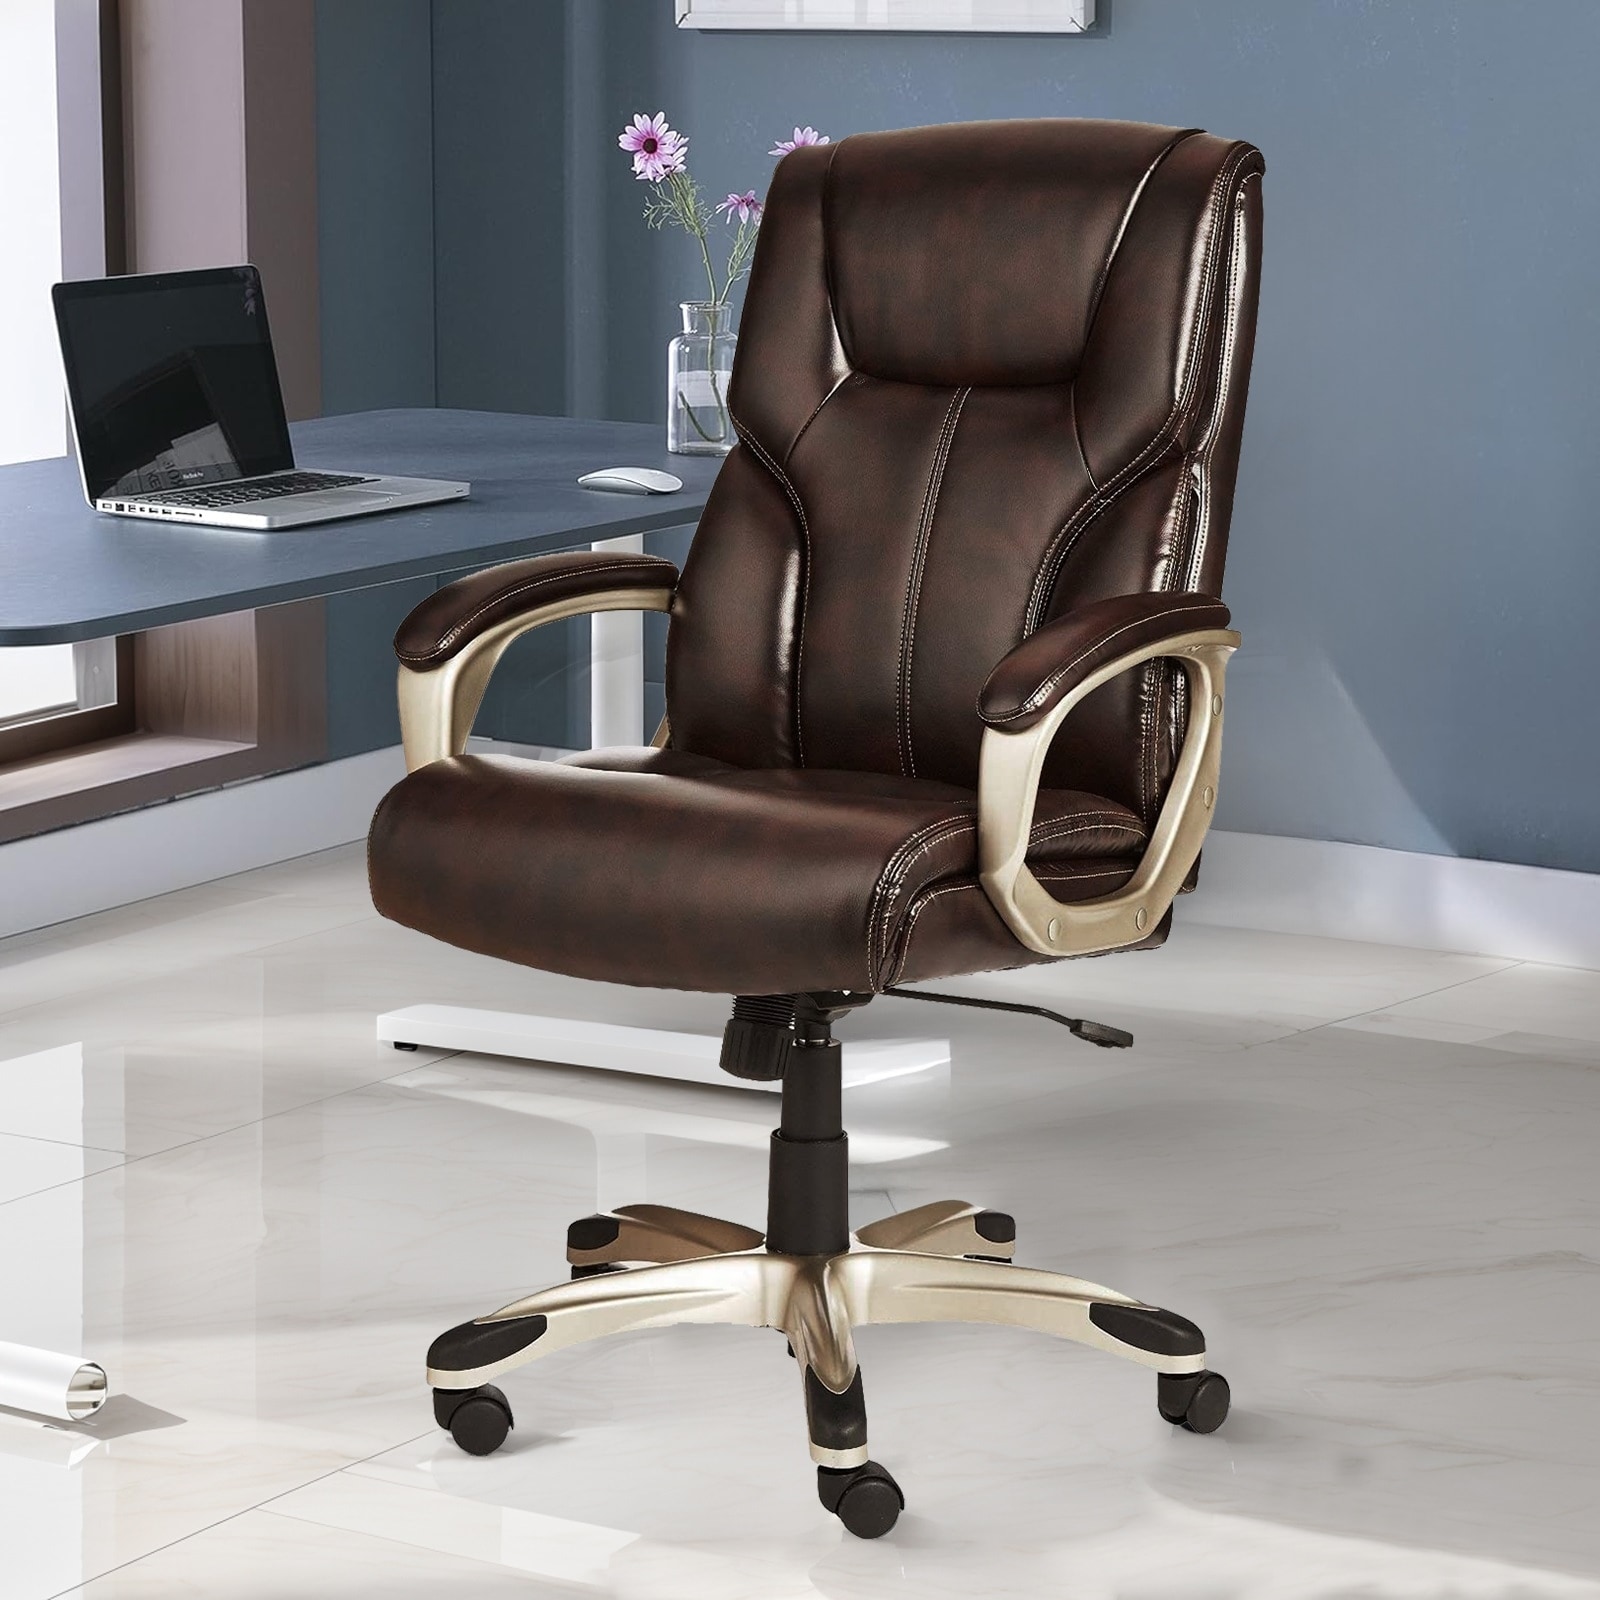 https://ak1.ostkcdn.com/images/products/is/images/direct/5c5fe10a76ec57a715e19f319d8ae4405f6e4245/Office-Chair%2C-Ergonomic-Desk-Chair%2C-High-Back-Faux-Leather-Task-Chairs-for-Home-Office-for-Adult-Working-Study.jpg